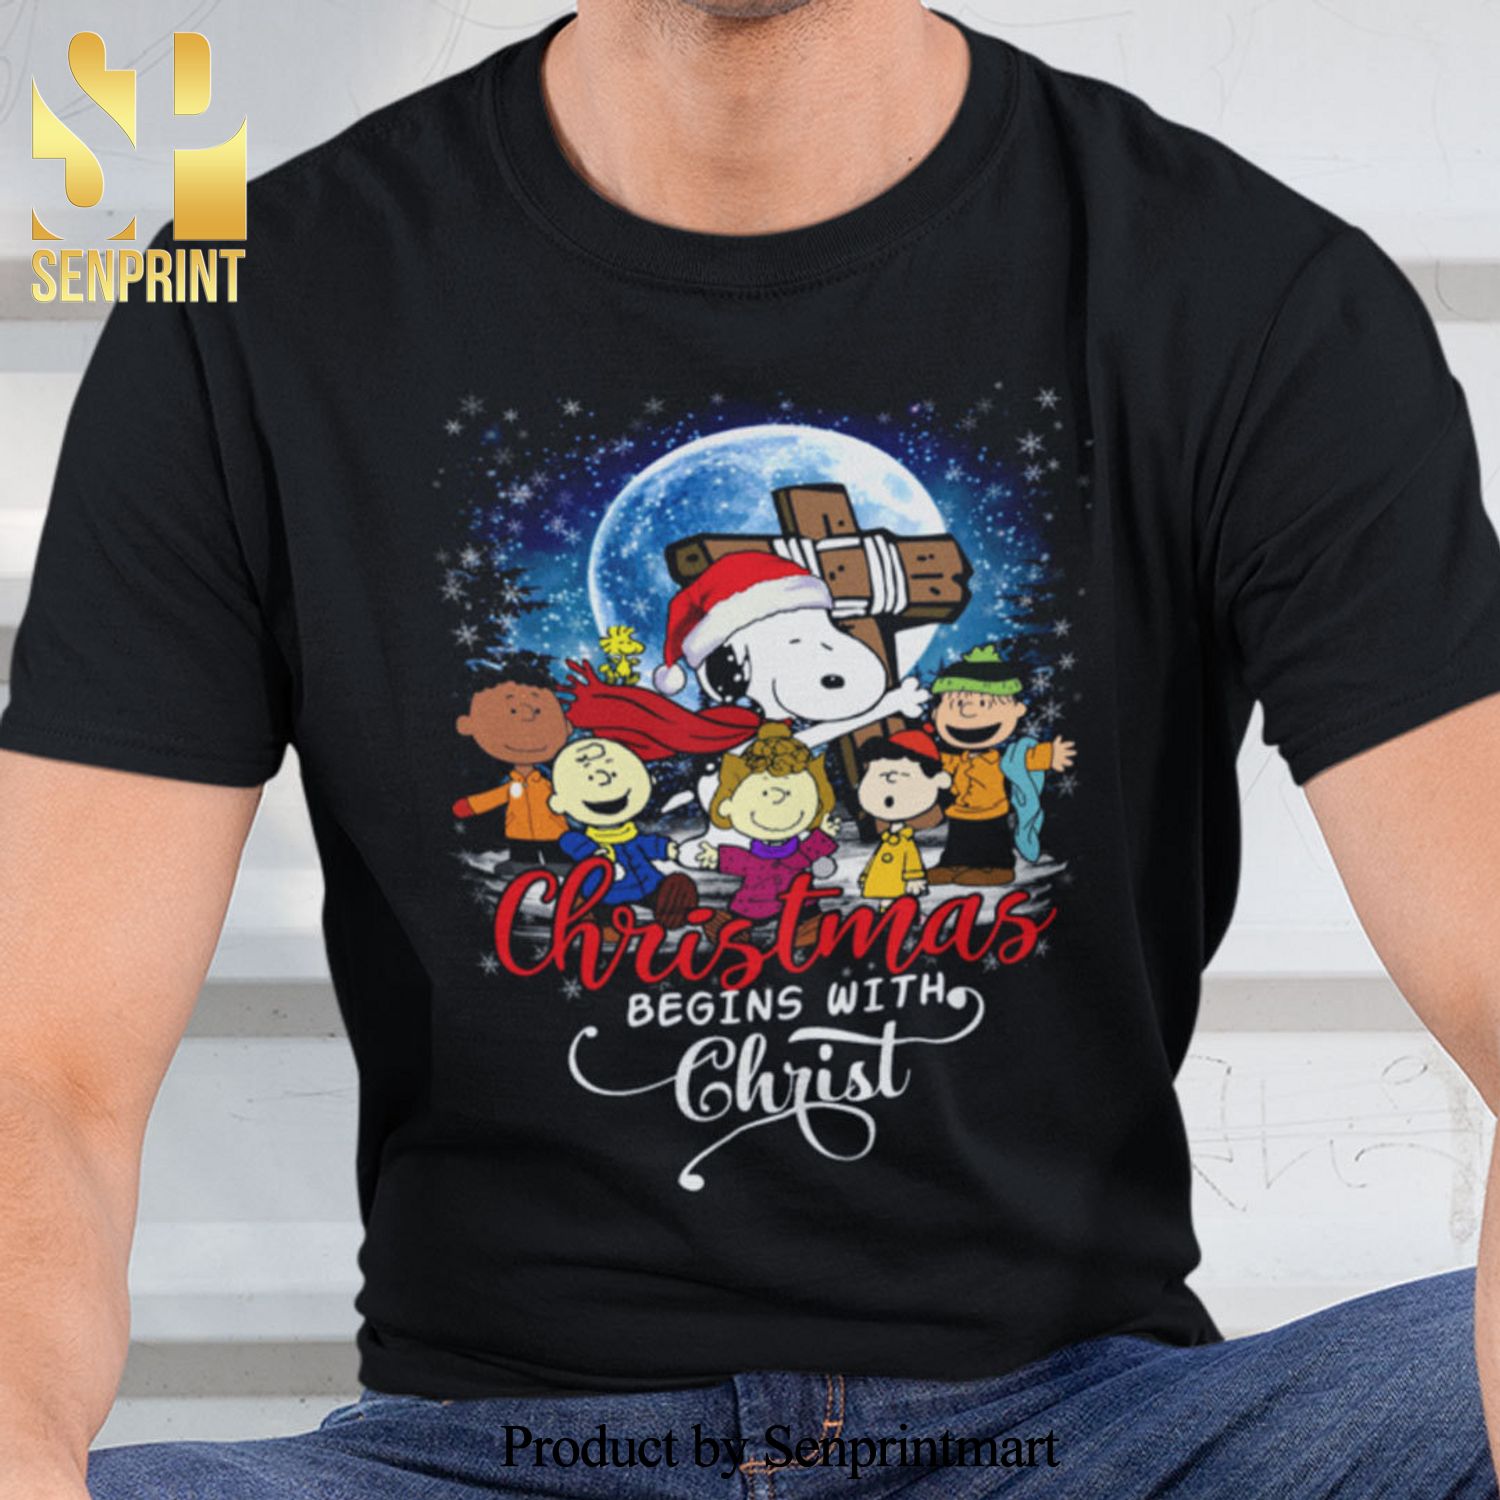 Christmas Begins With ChrisGifts Shirt Snoopy